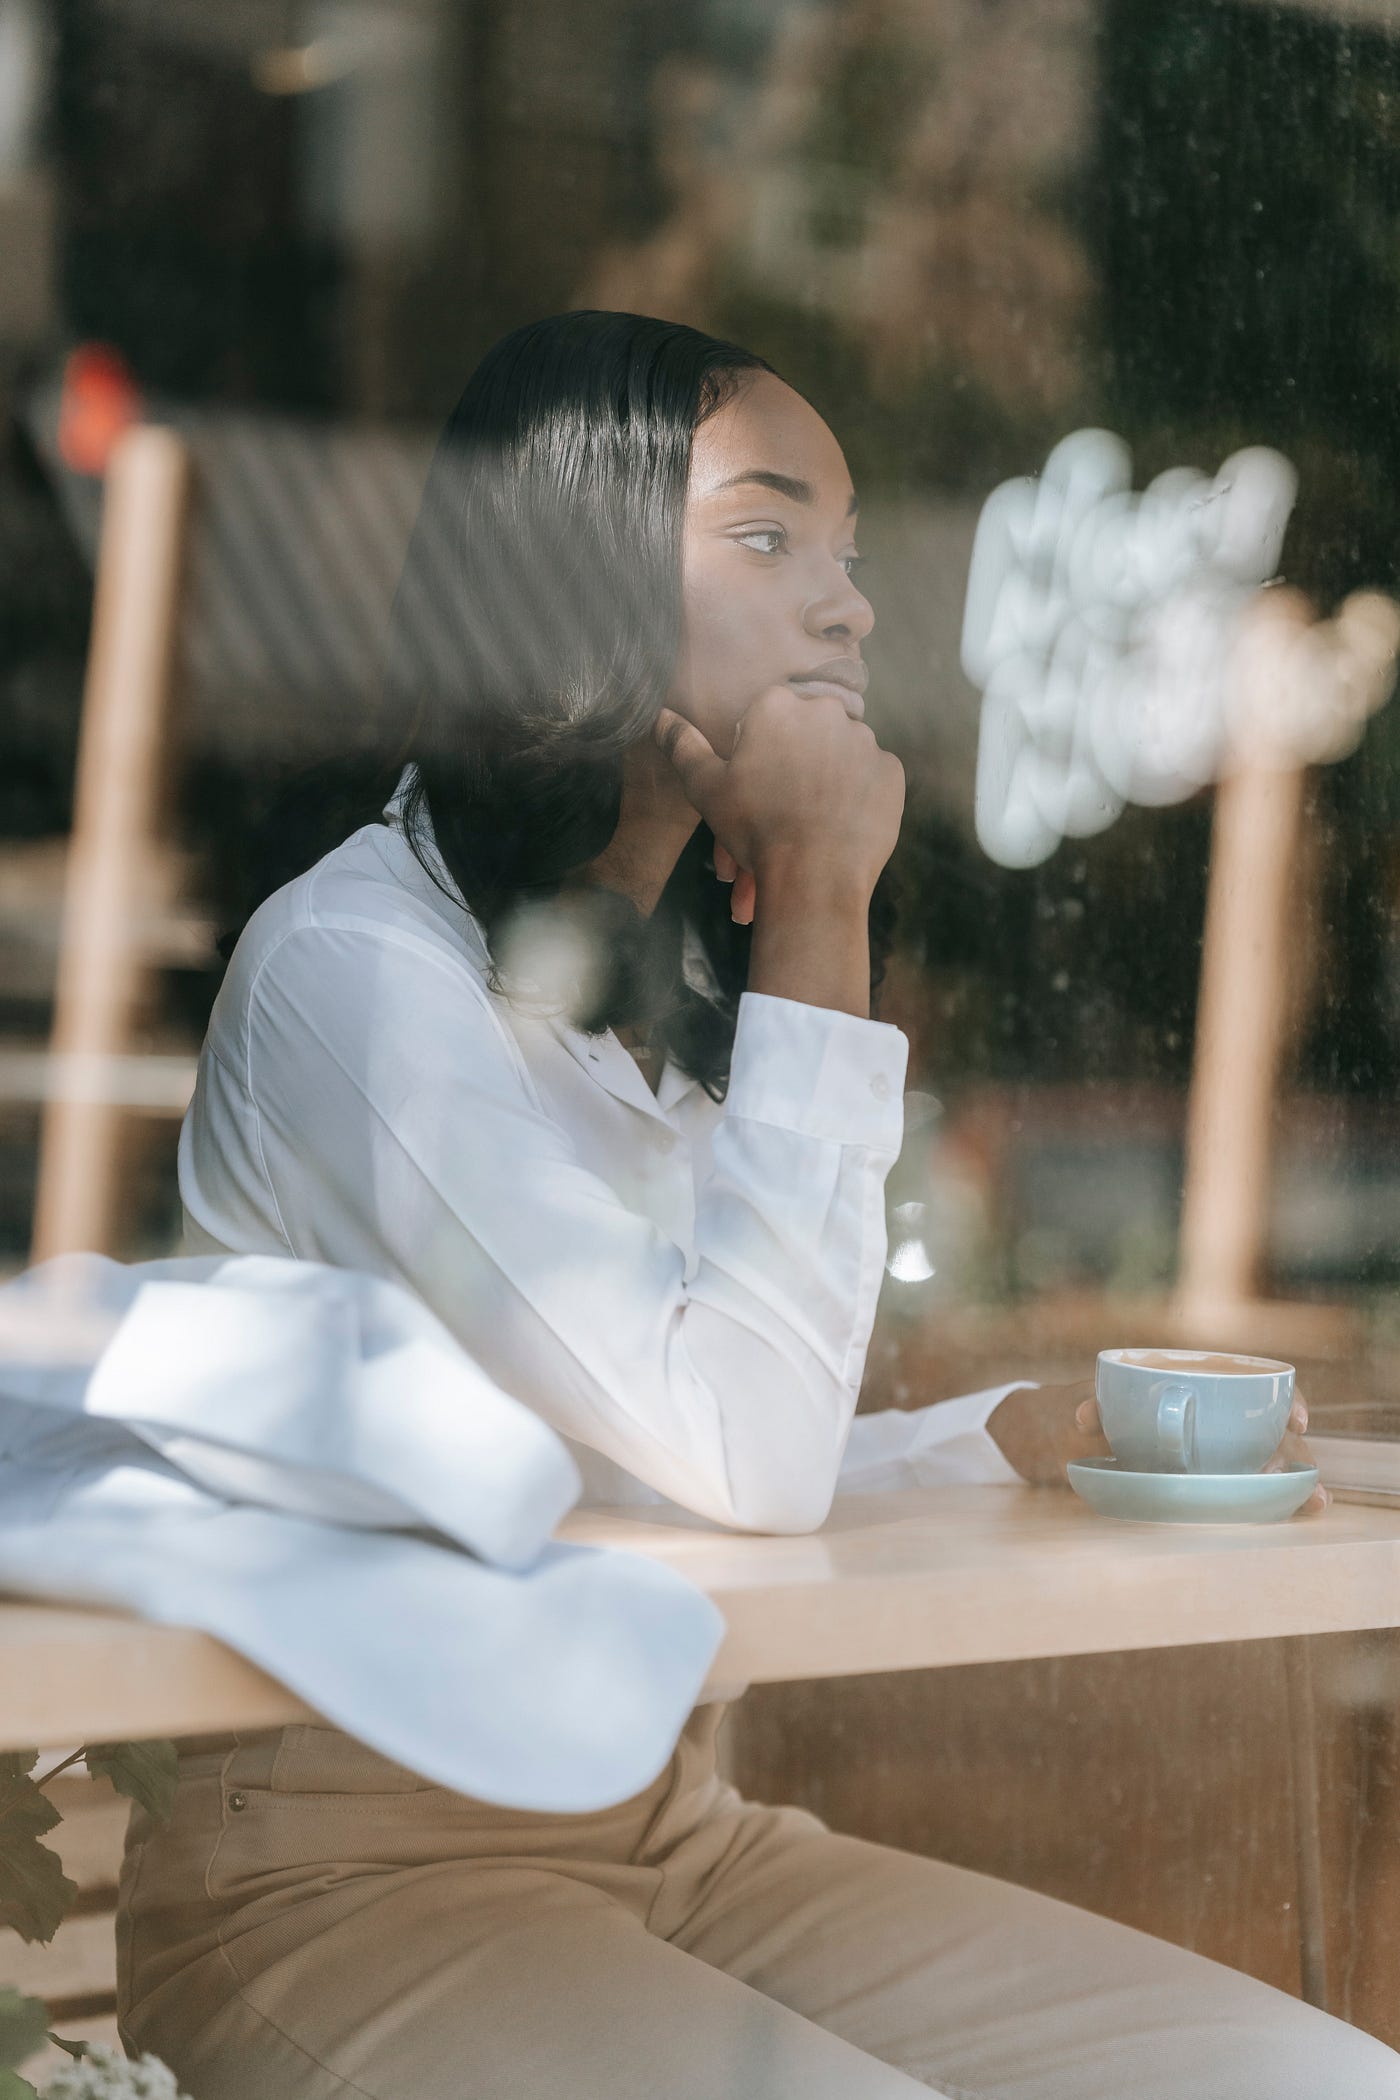 Black woman sitting alone lost in her thoughts drinking coffee